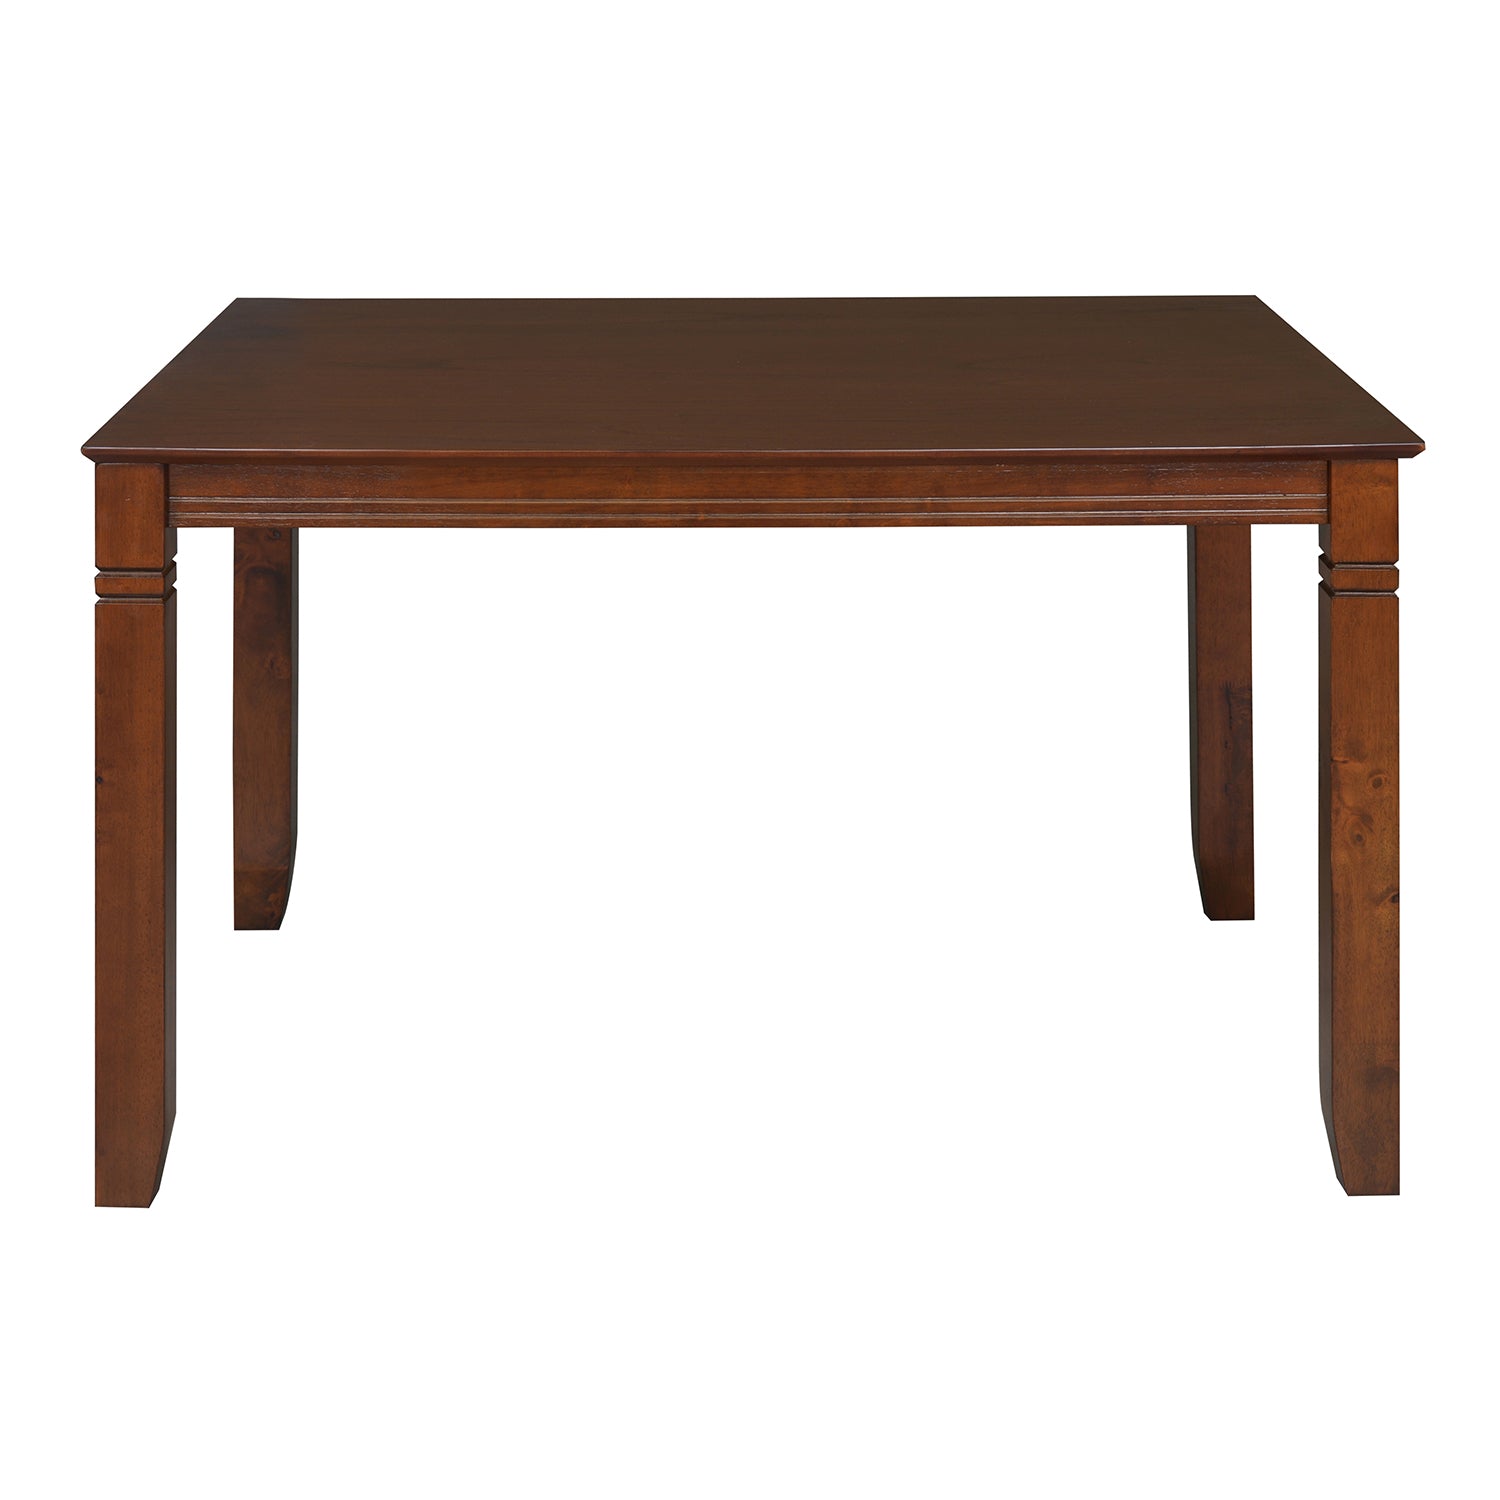 Floret 4 Seater Dining Table (Walnut)